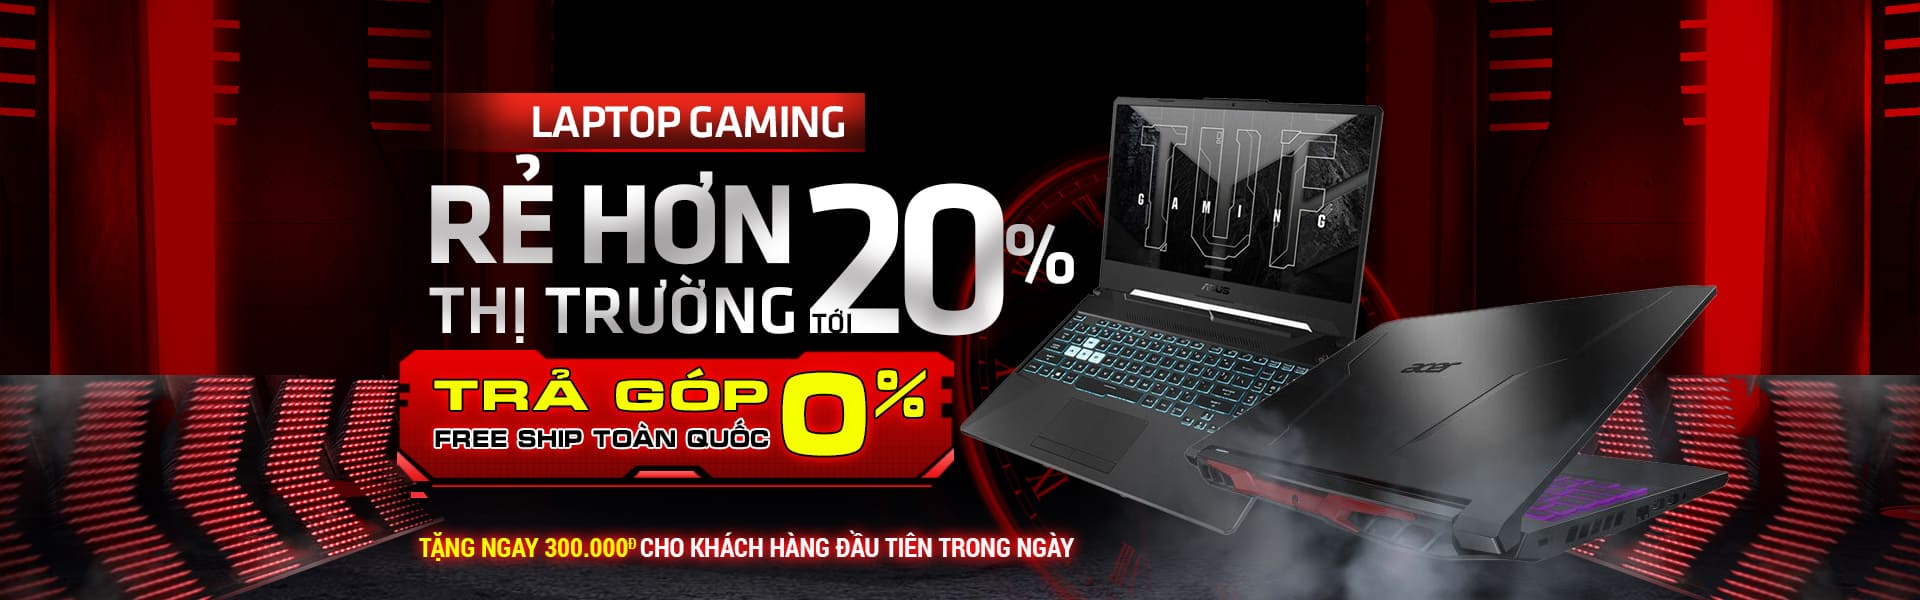 1920x600 anh head laptop gaming 2